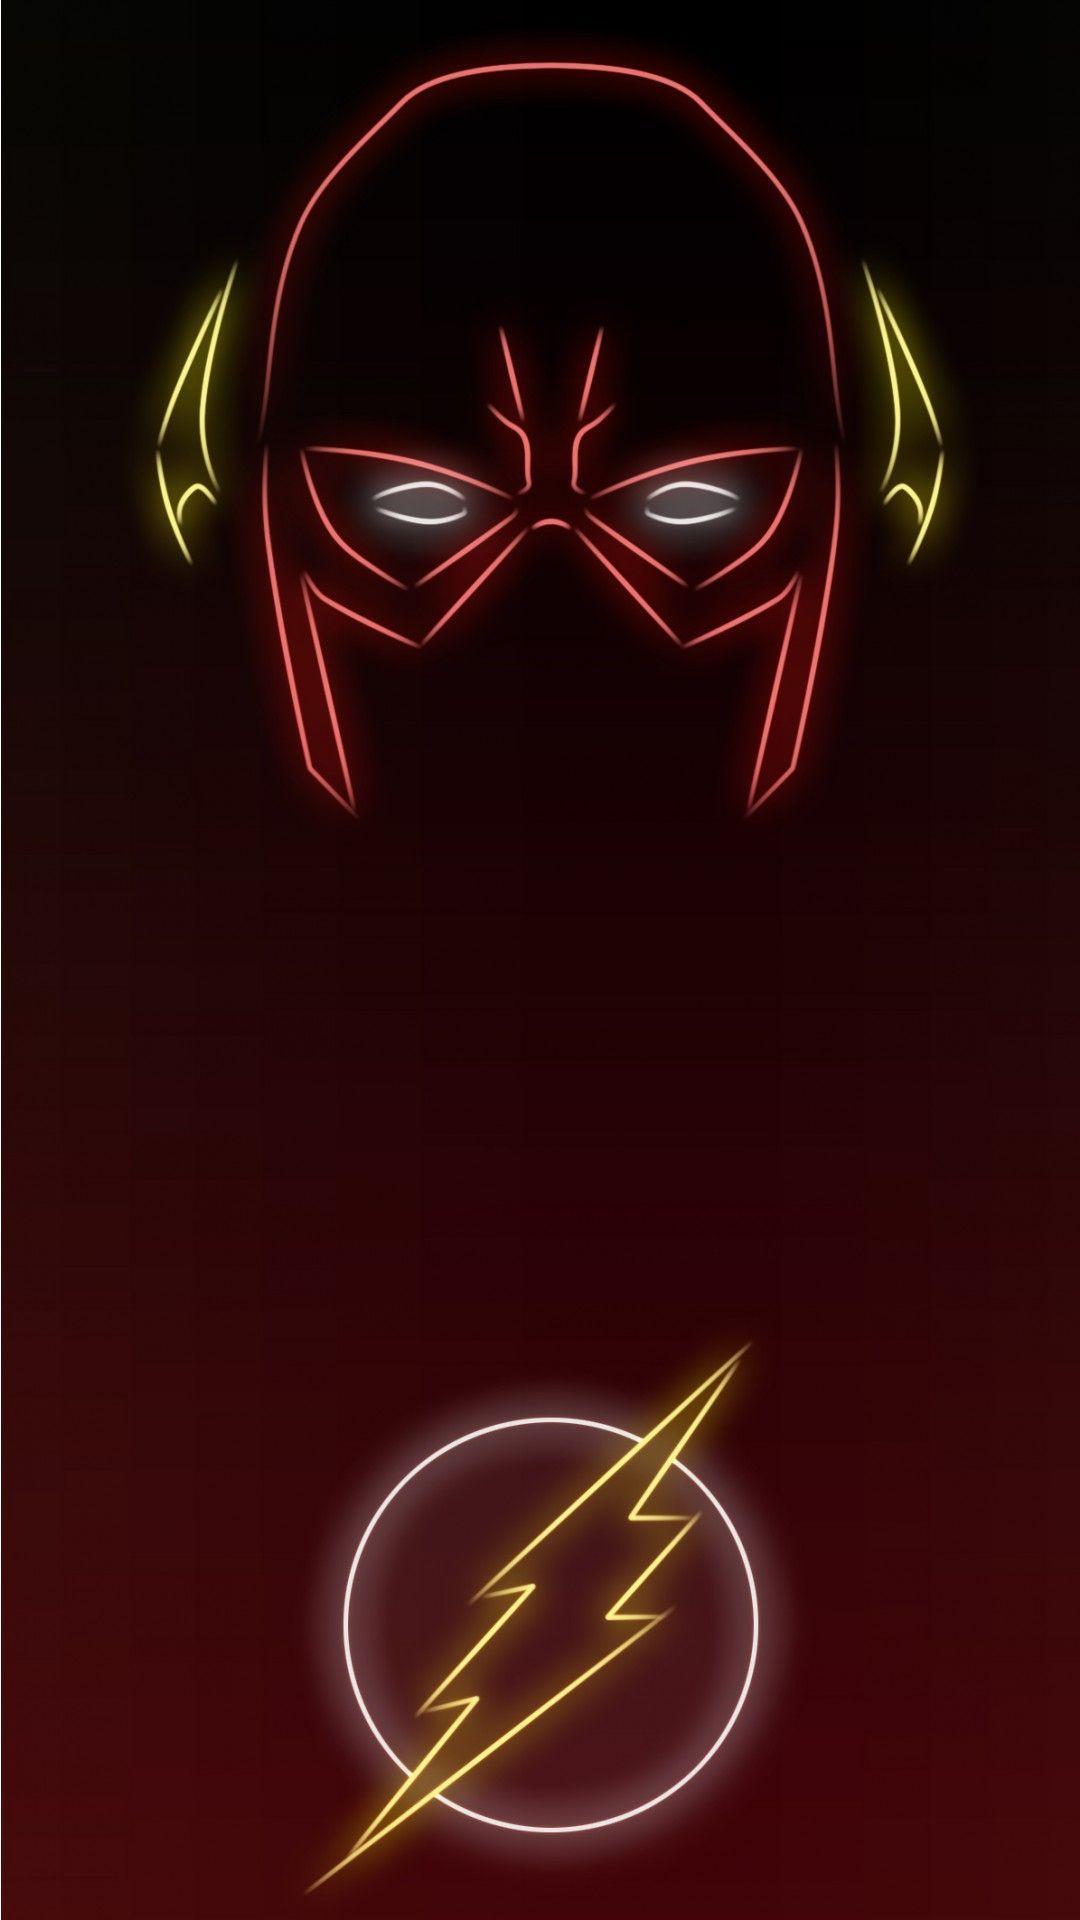 Neon Light The Flash wallpaper 1080 x 1920 Wallpaper available